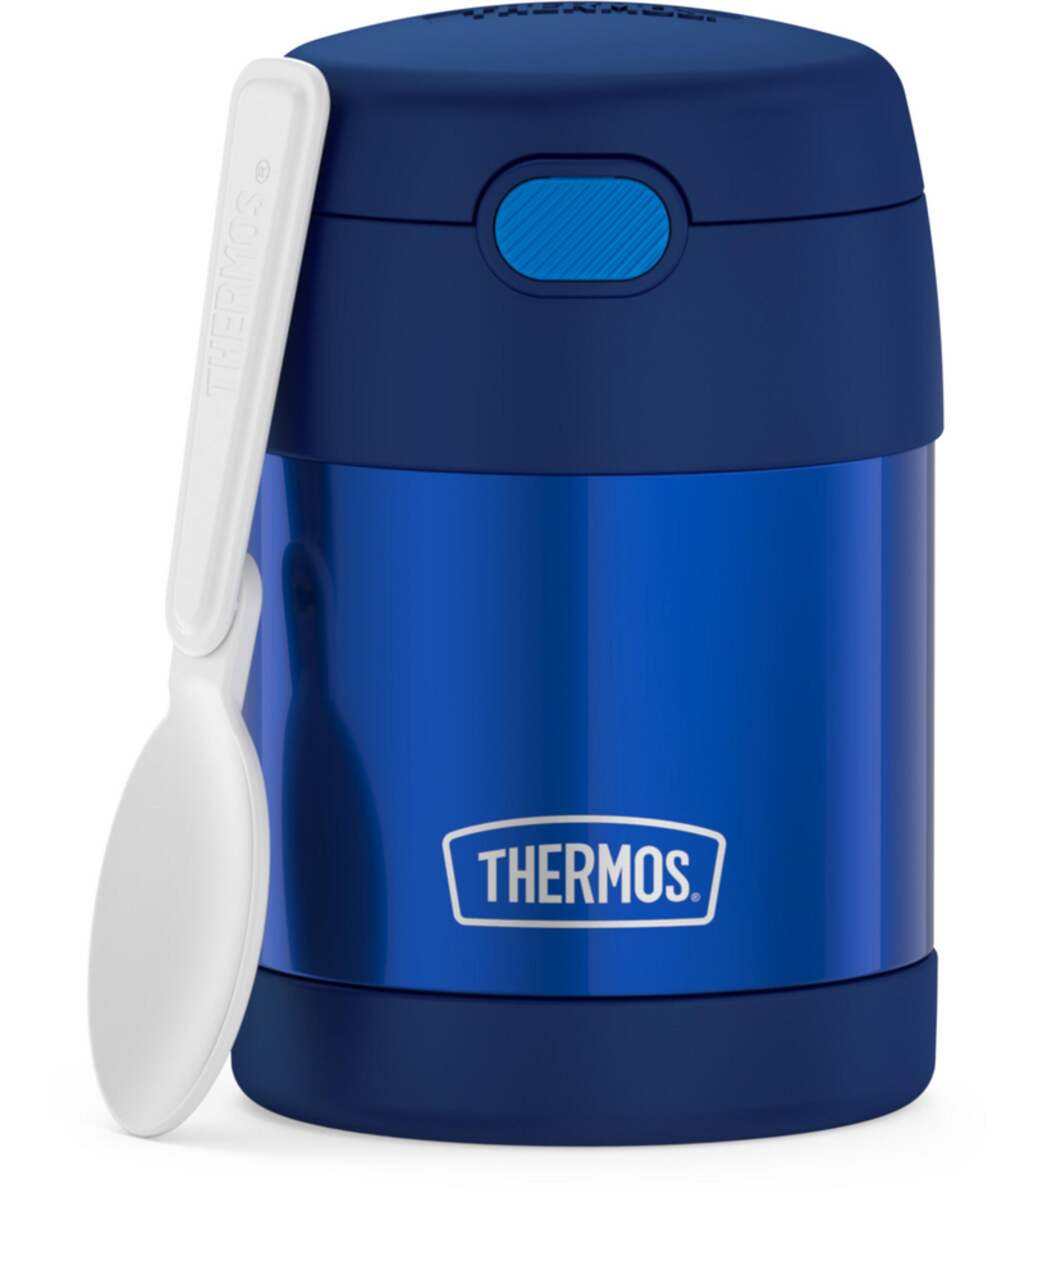 https://media-www.canadiantire.ca/product/living/kitchen/food-storage/1422114/thermos-10oz-food-jar-blue-555d102f-c069-487c-8a06-9ed42cb952ff.png?imdensity=1&imwidth=1244&impolicy=mZoom